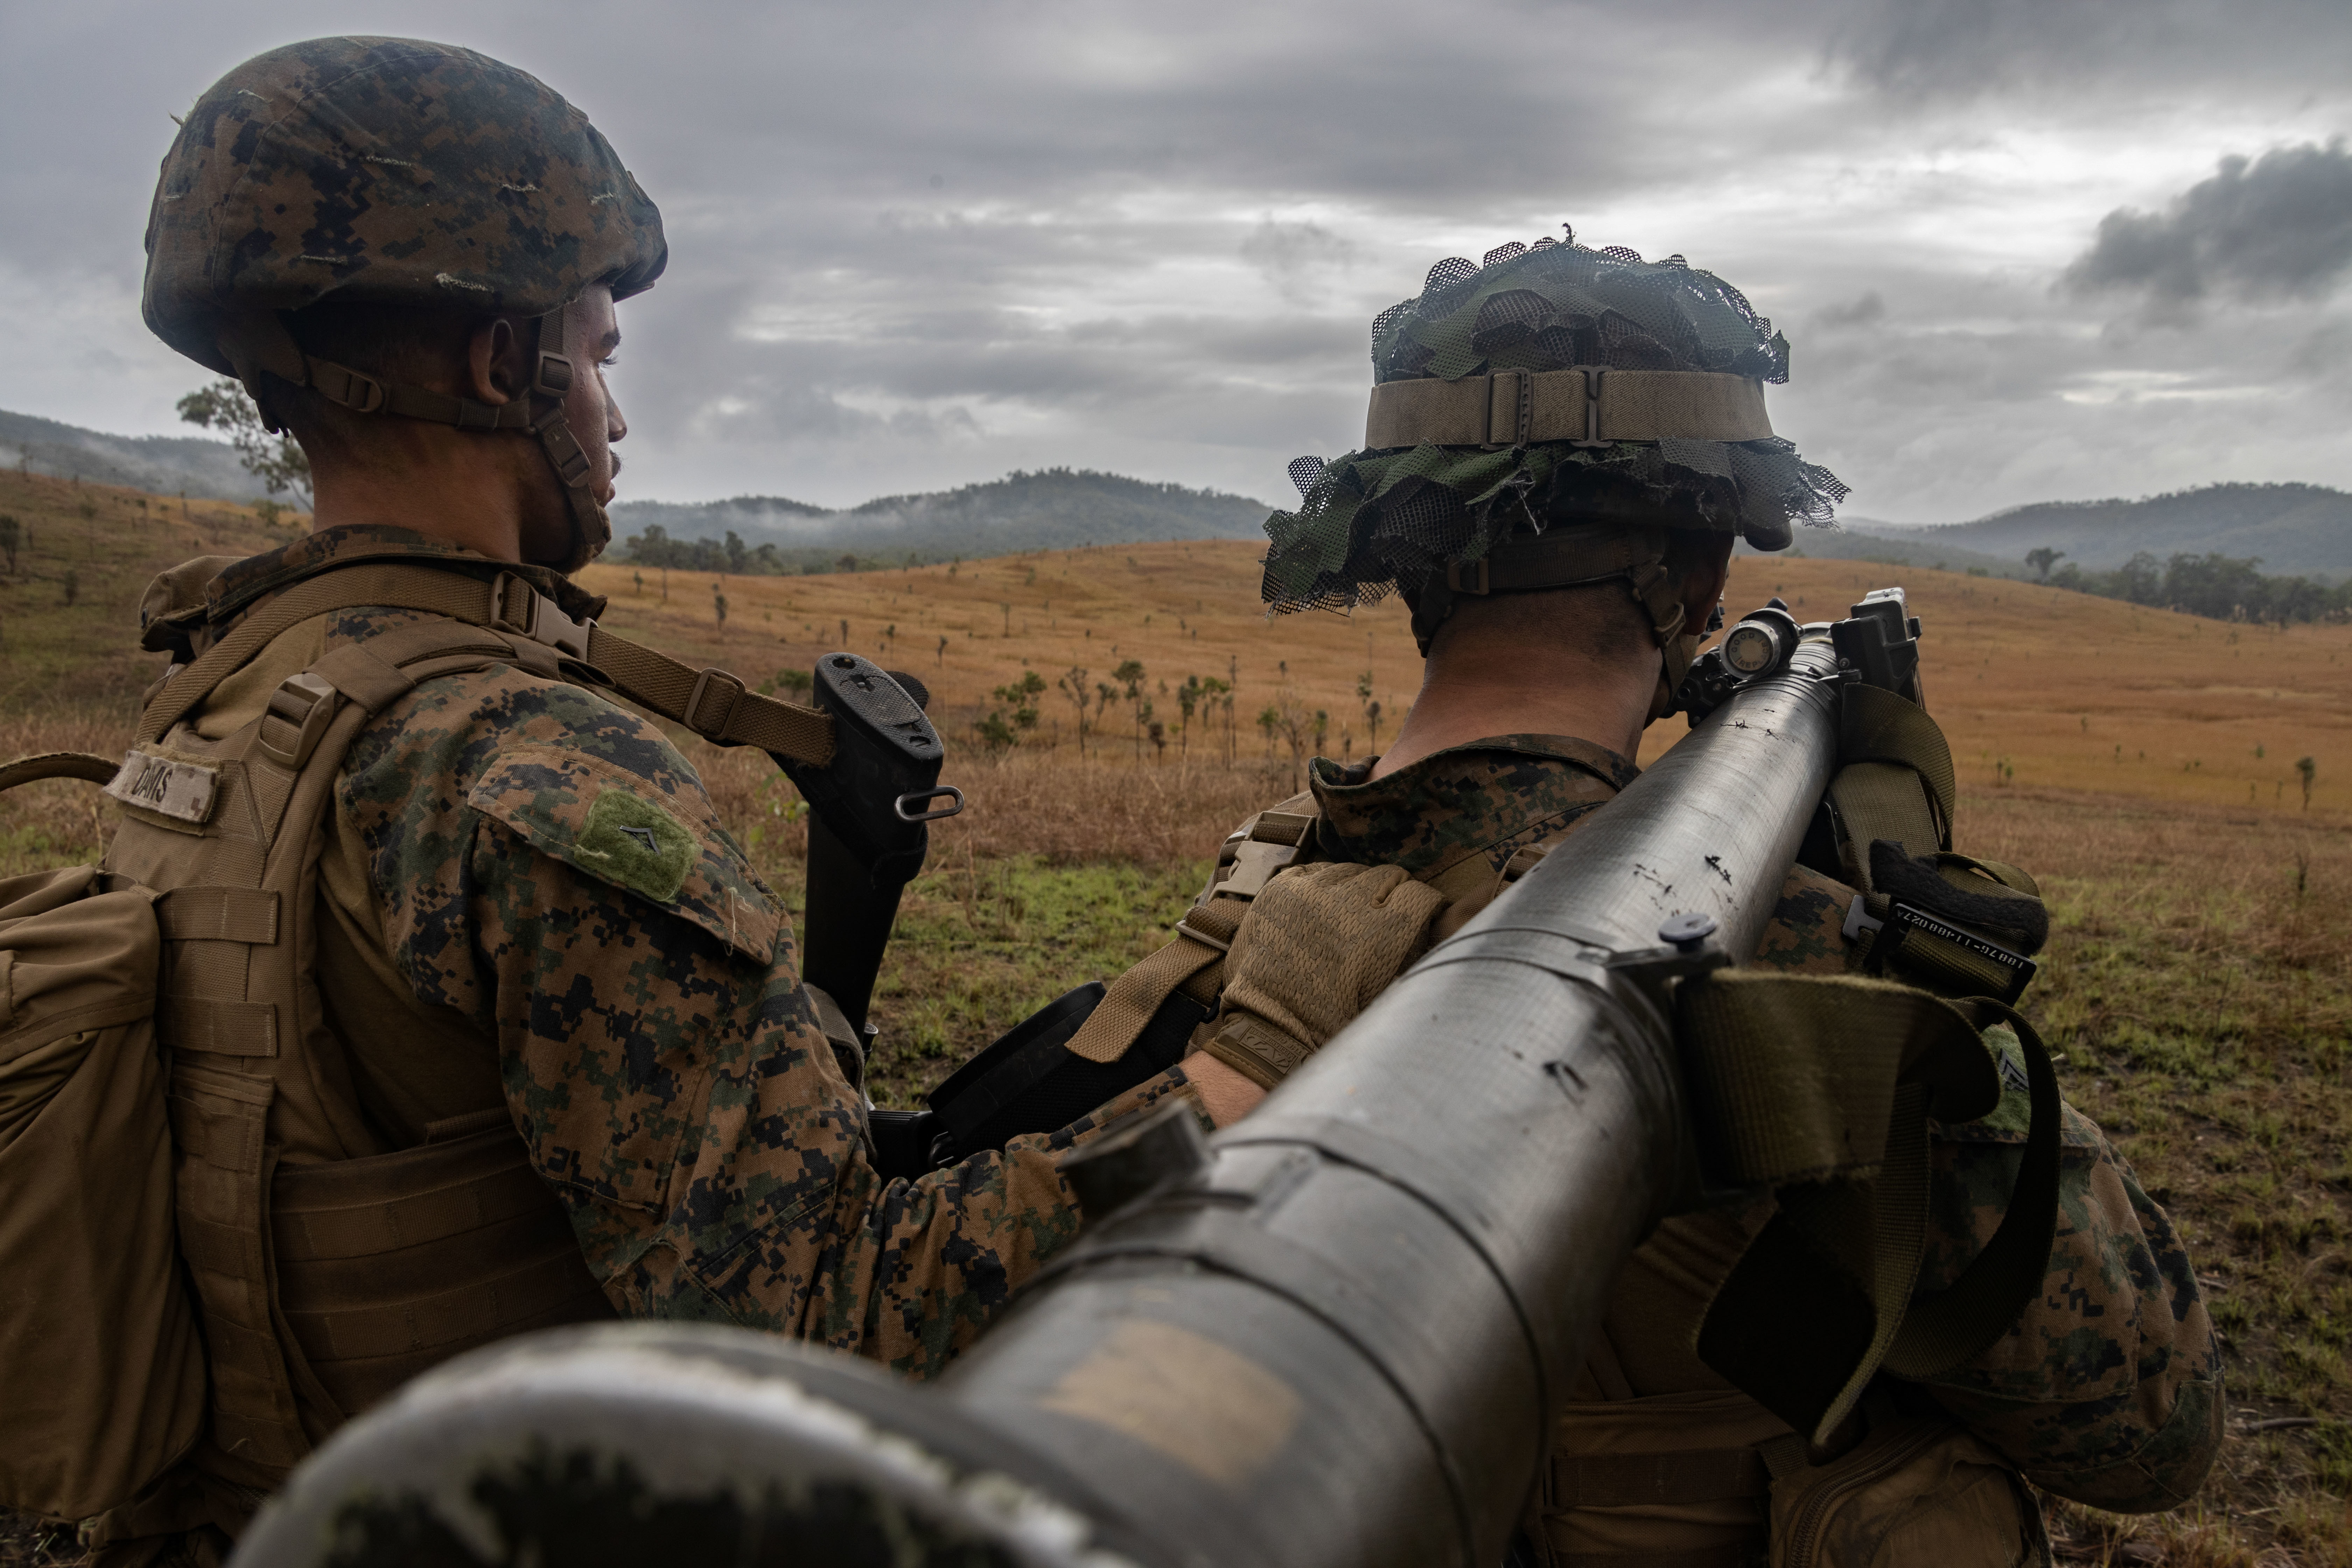 Doubts about scout snipers arose in infantry units, No. 2 Marine says